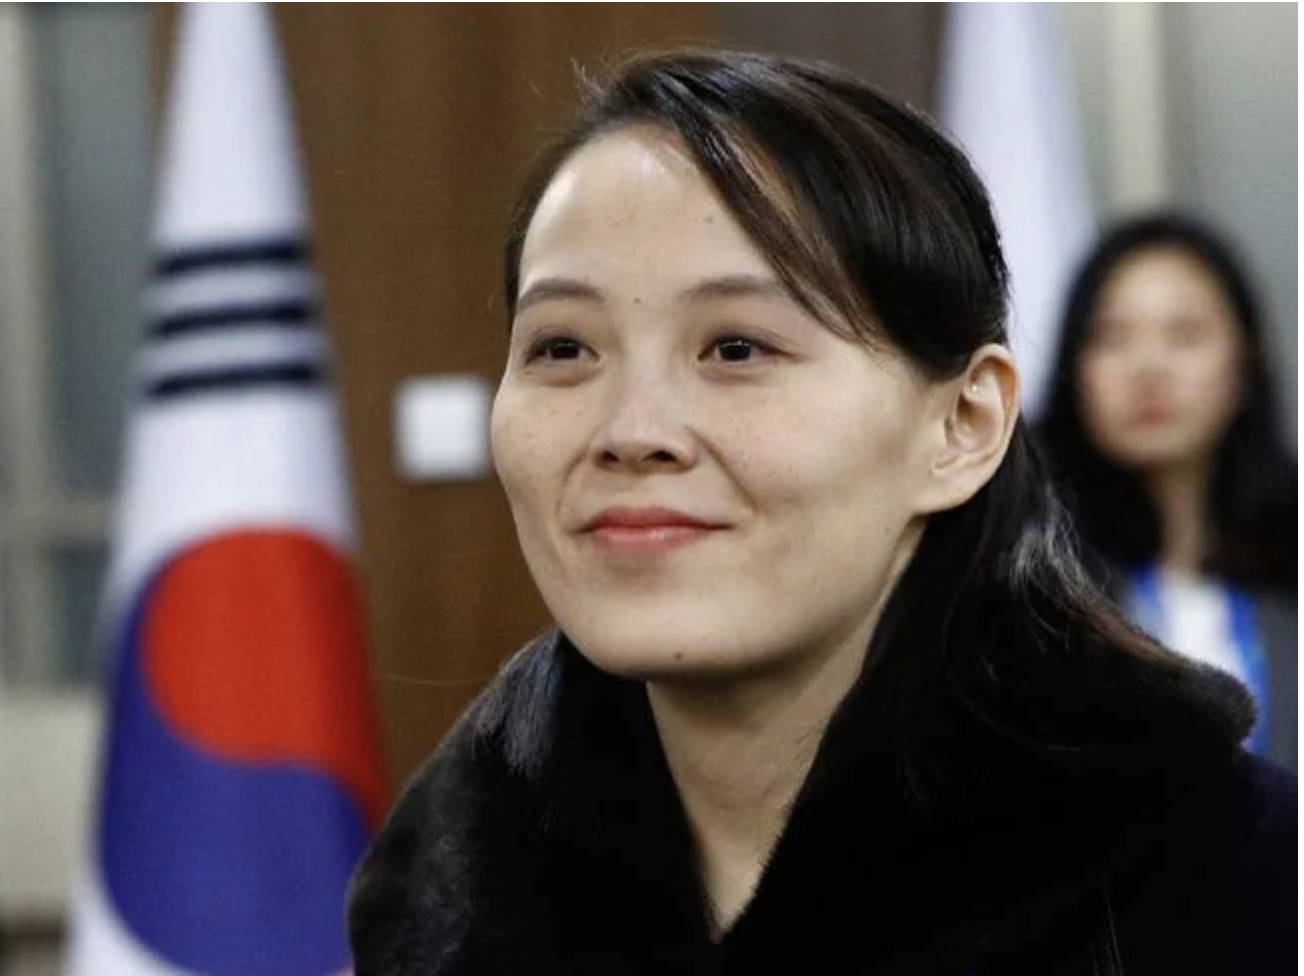 Kim Yo-jong has been rumoured to have accepted a greater role within North Korea’s leadership. Picture: Patrick Semansky/AFP Kim Yo-jong has been rumoured to have accepted a greater role within North Korea’s leadership. Picture: Patrick Semansky/AFPSource:AFP